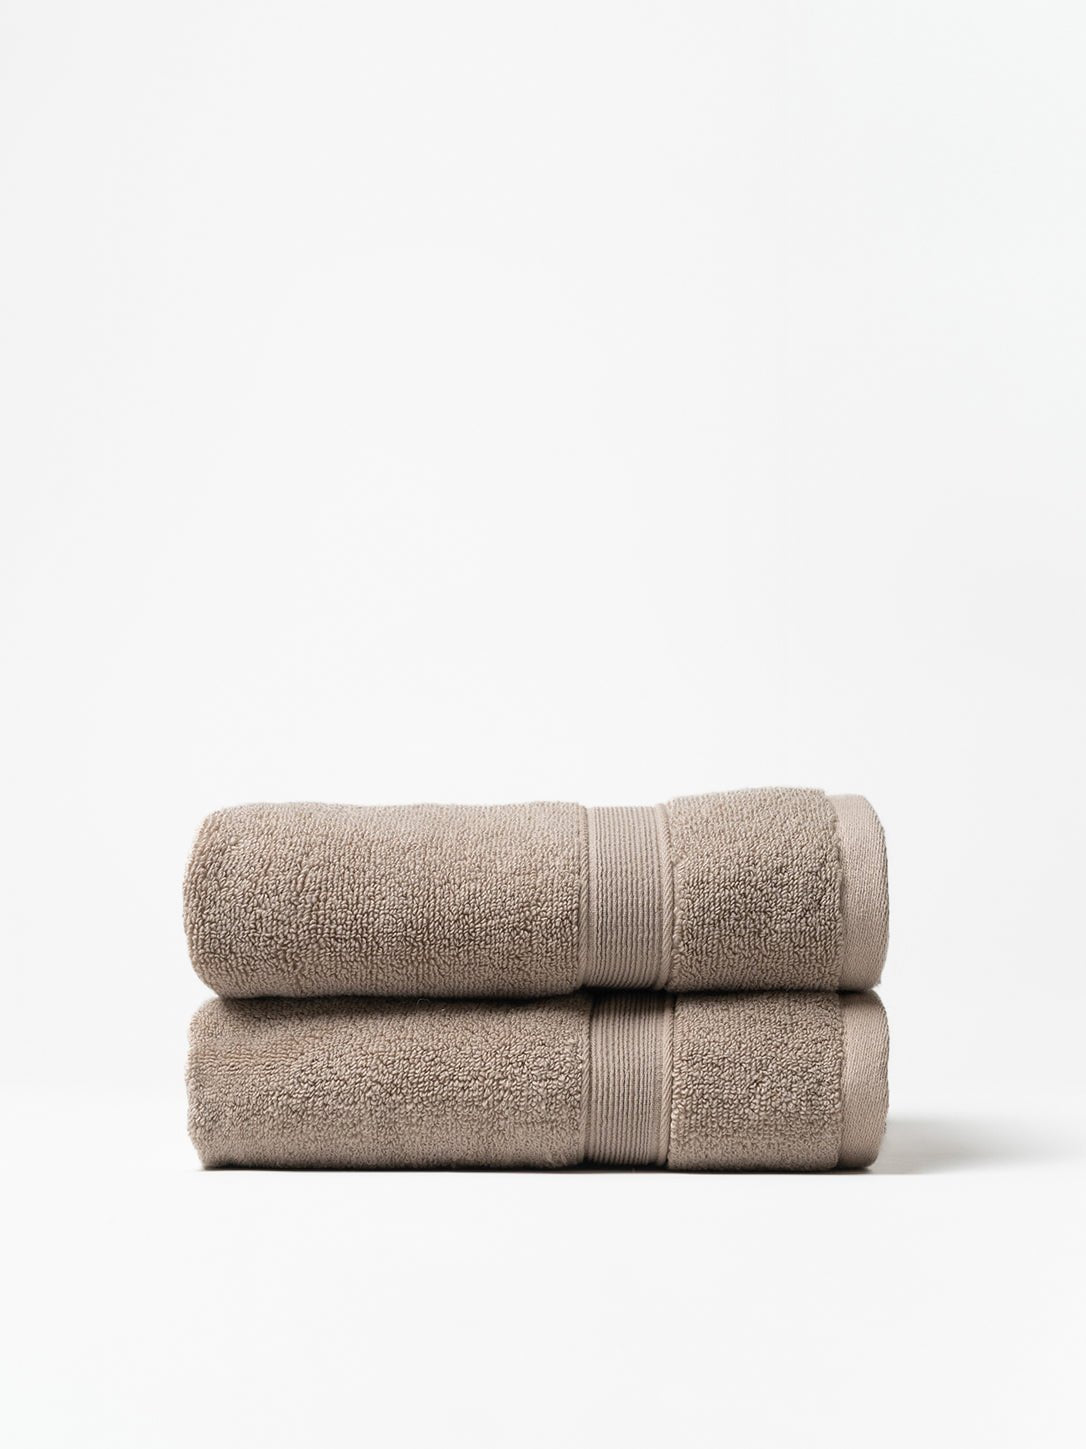 Sand hand towels folded with white background |Color:Sand